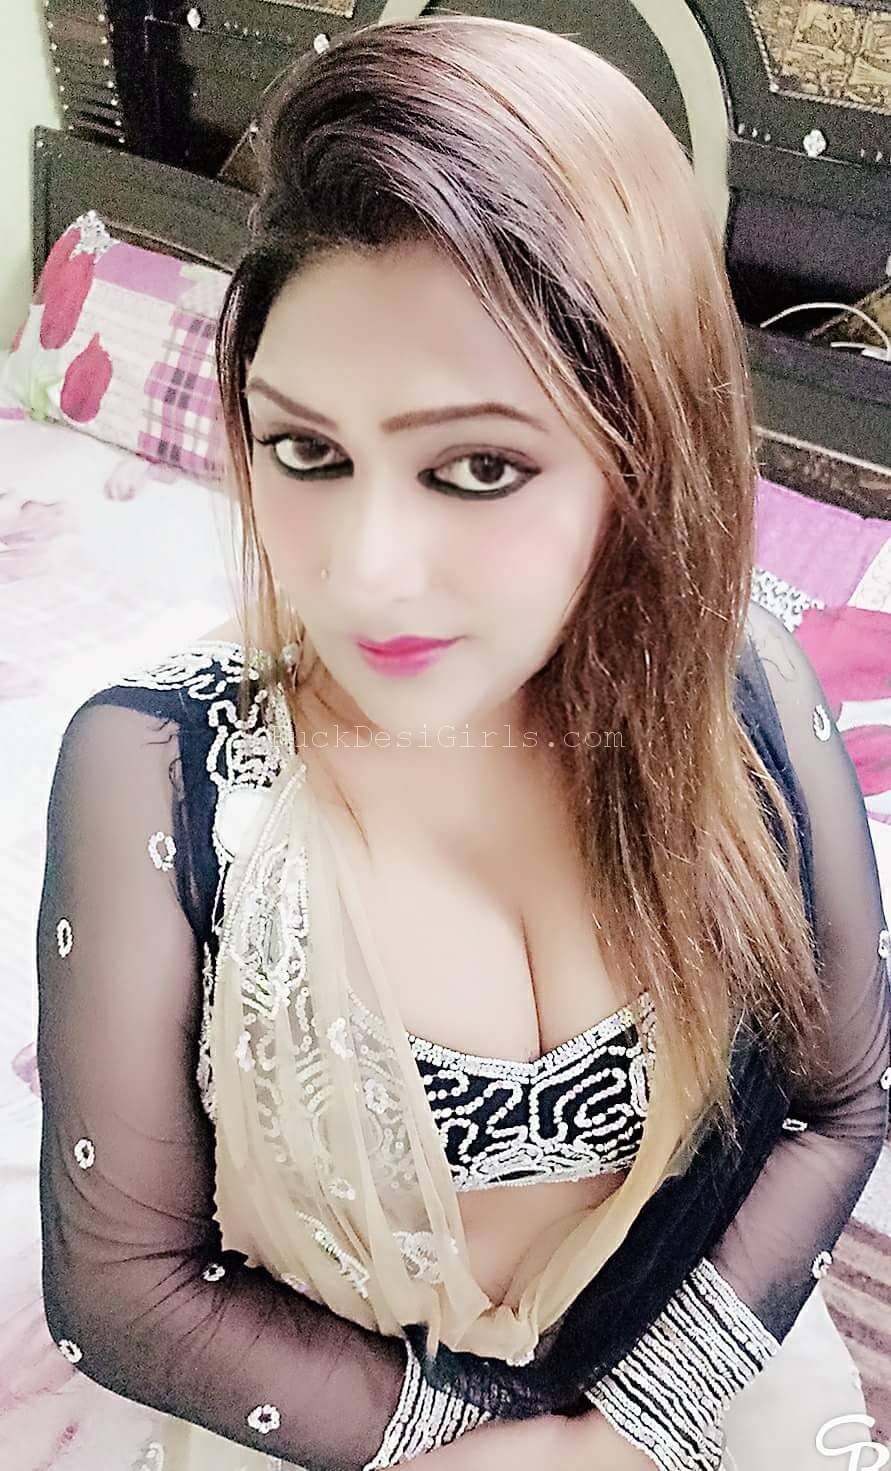 Horny Naked Goa Girls Xxx Porn Topless Sex Images 2018 Best Indian Porn